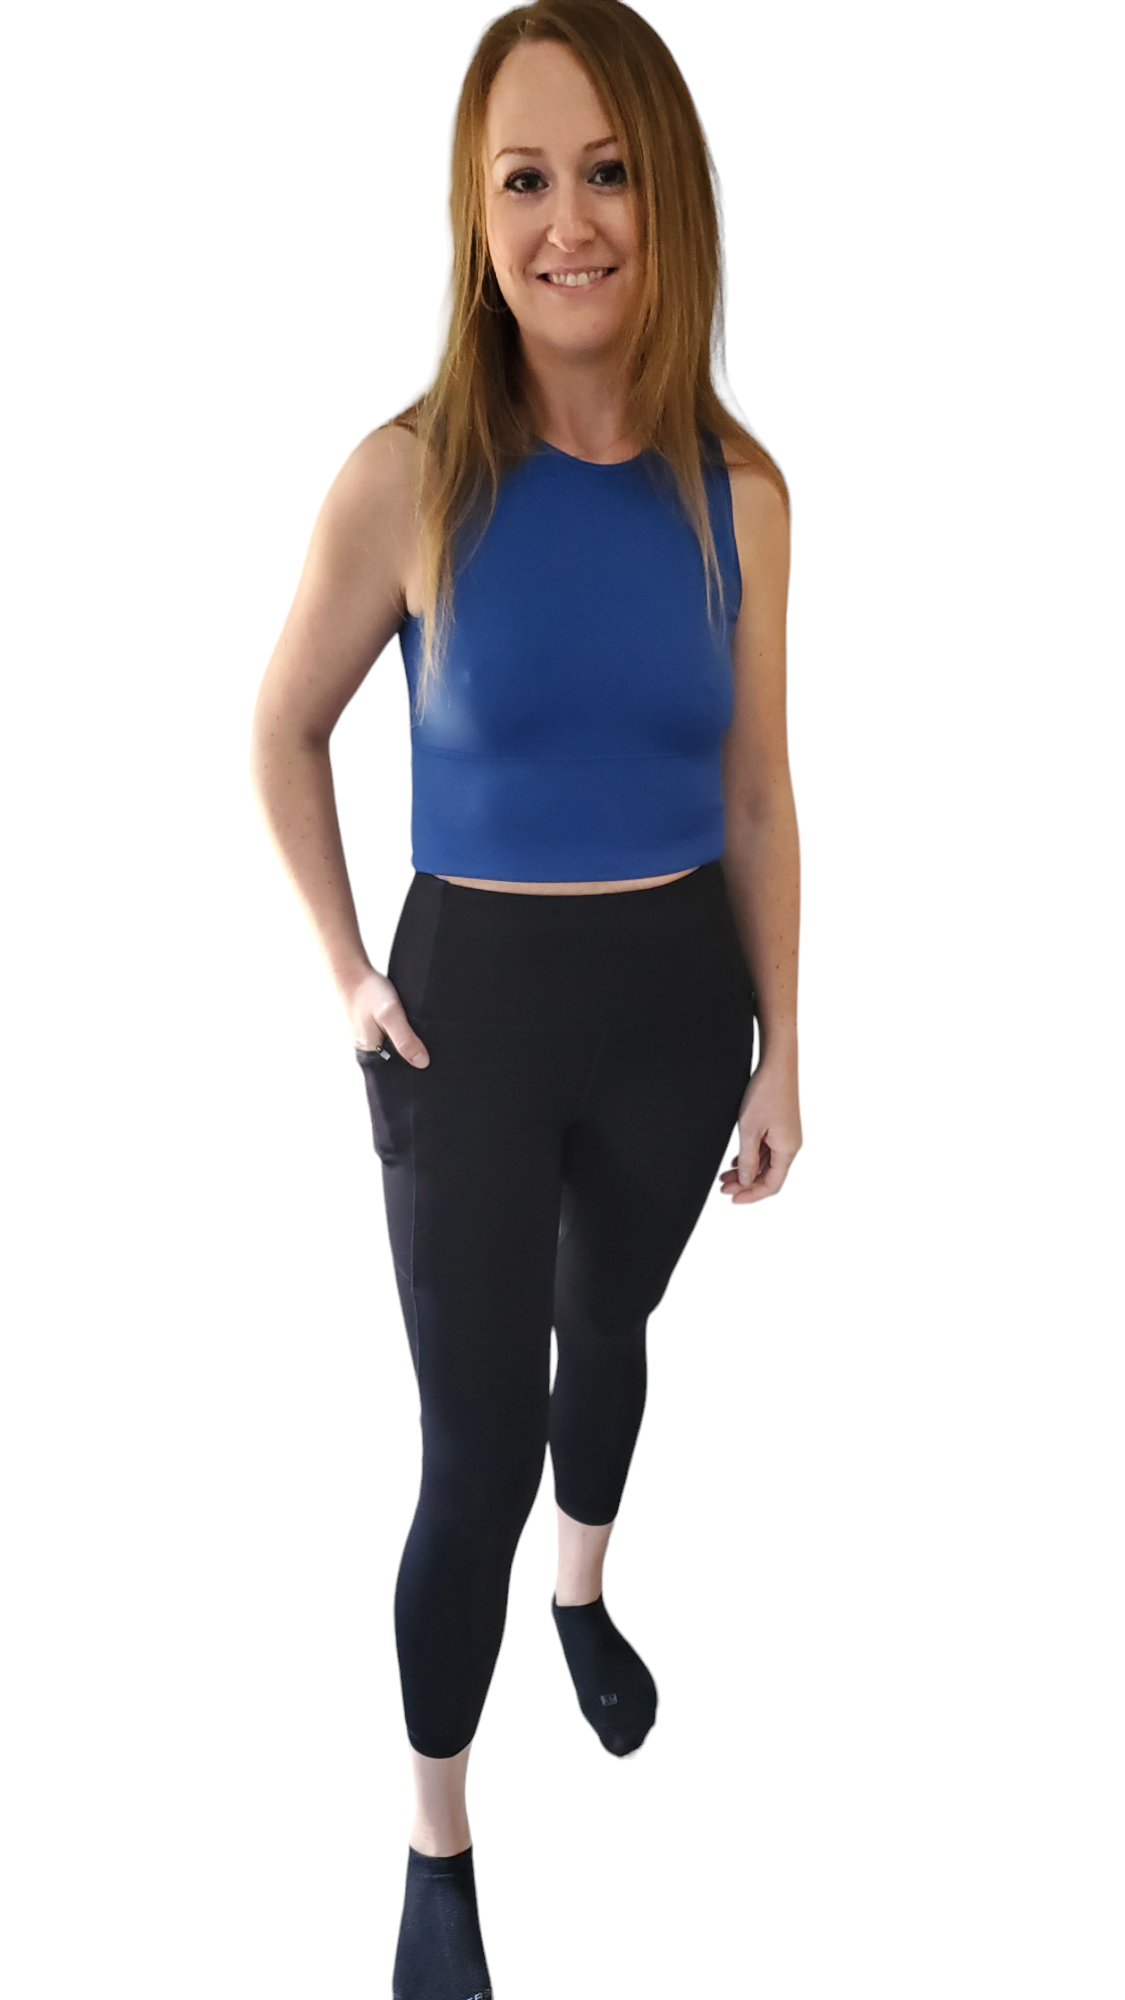 High Waisted Tummy Control Shaping Leggings with Pockets that have Zippers